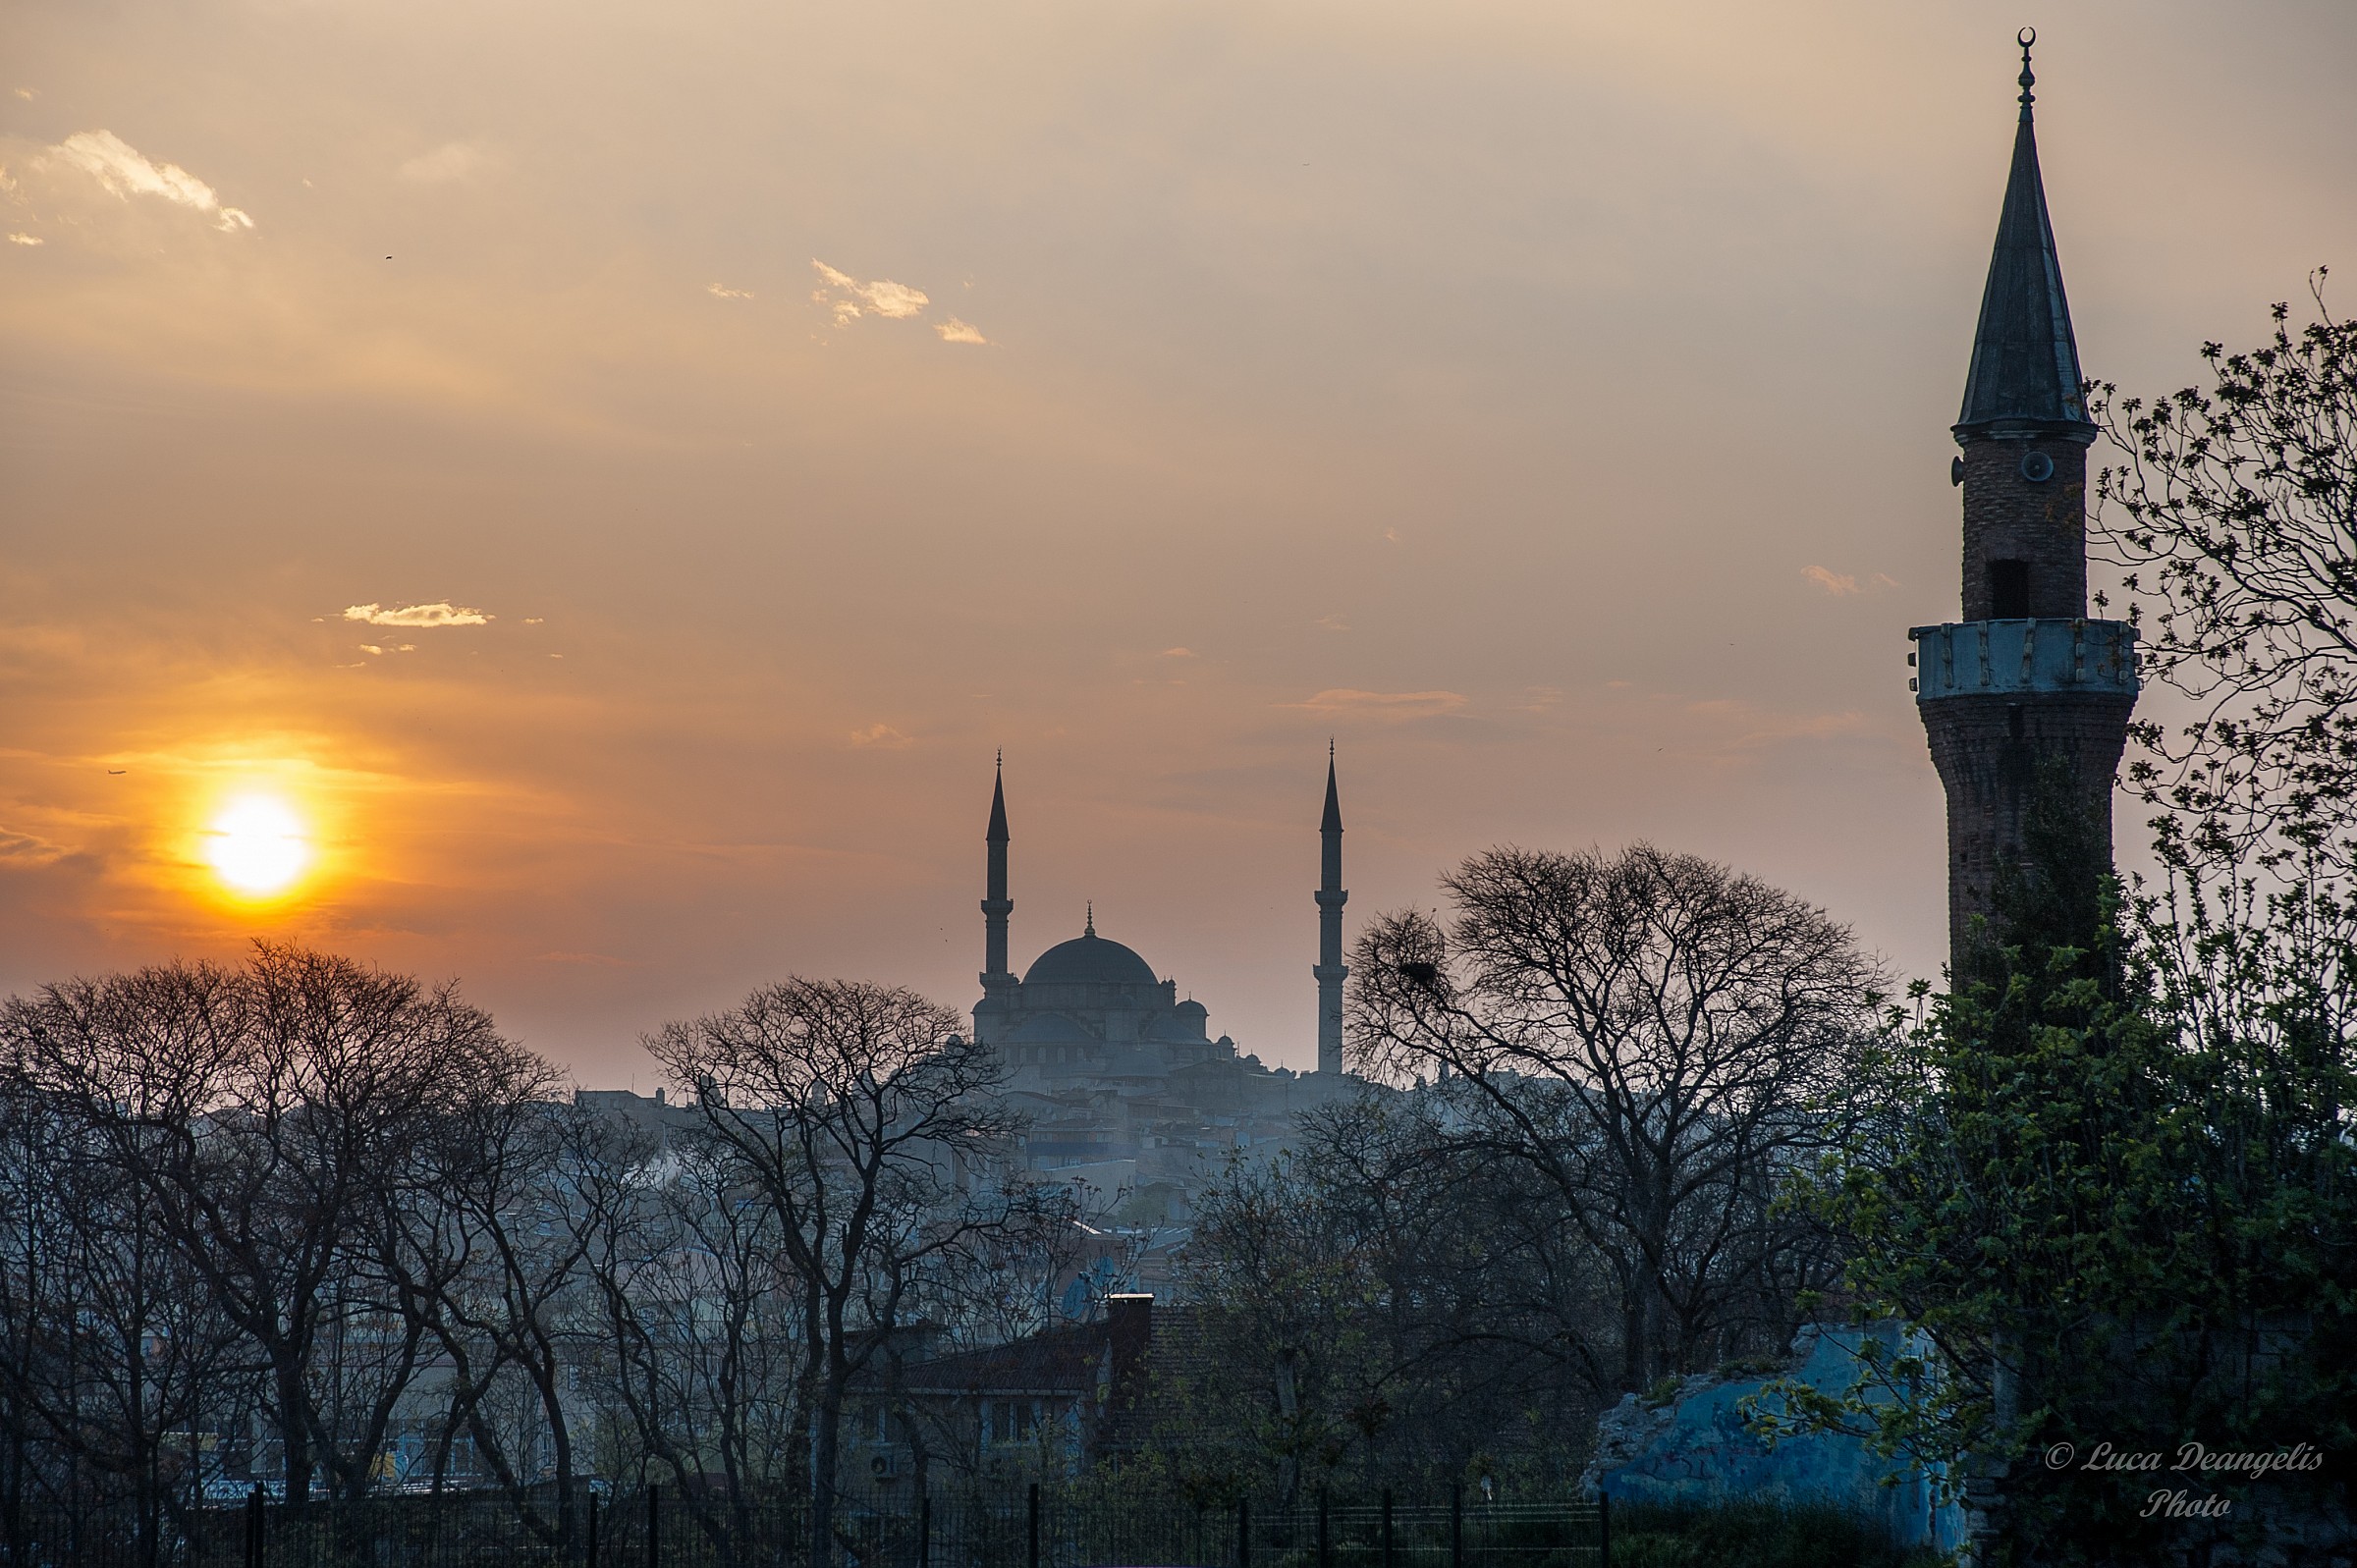 Sunset on the mosque fatih...